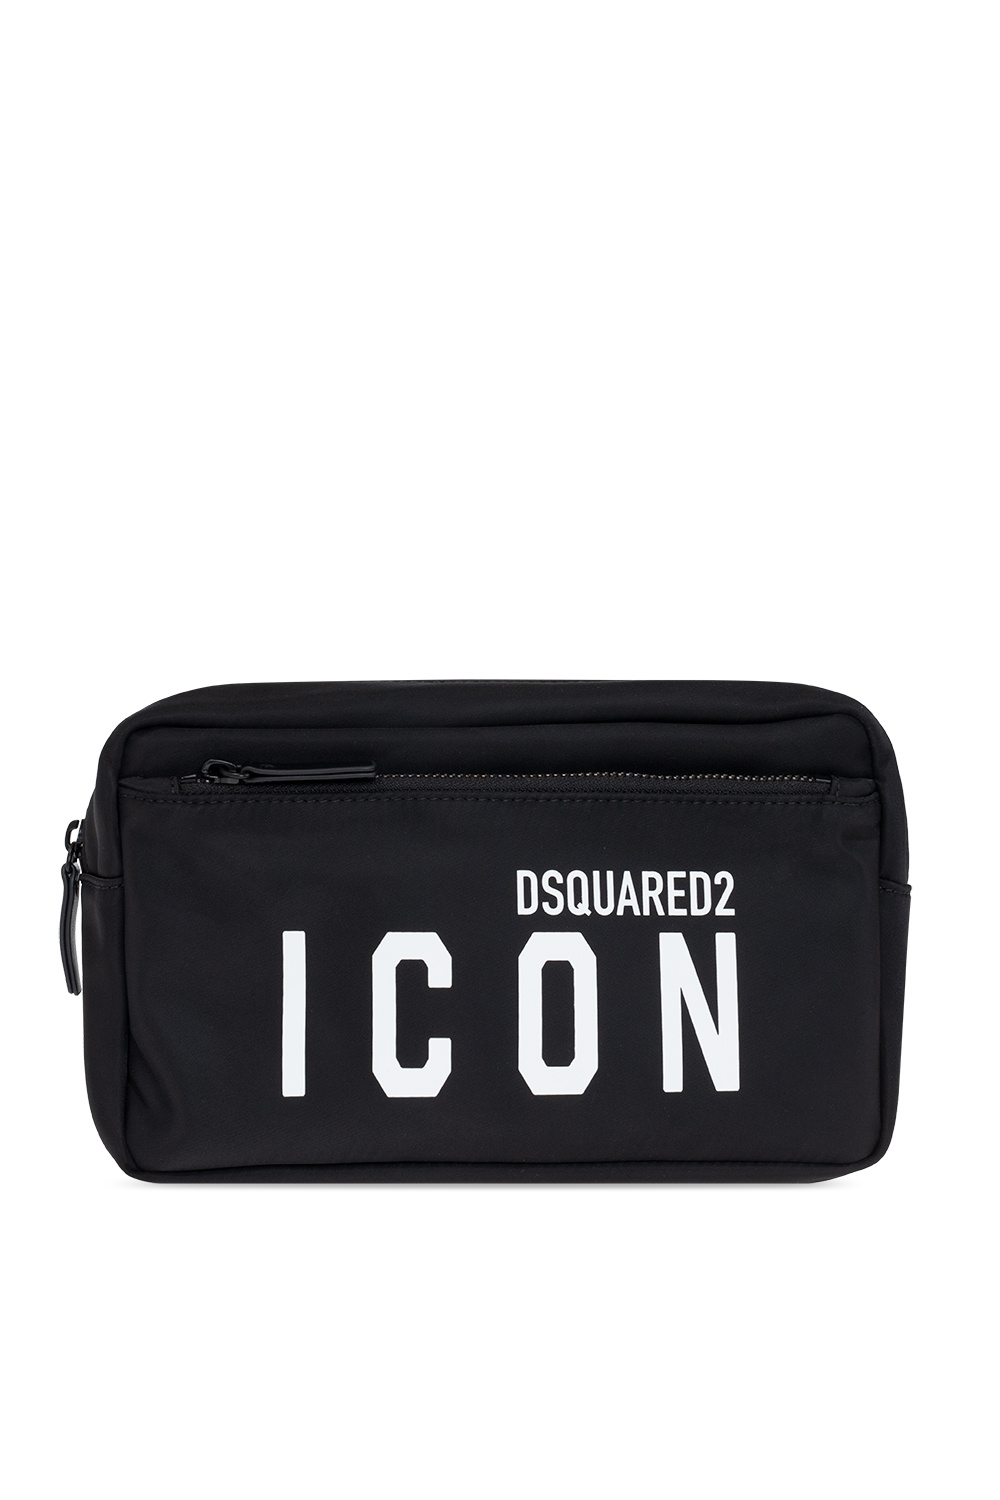 Dsquared2 fiorelli swift foldable backpack